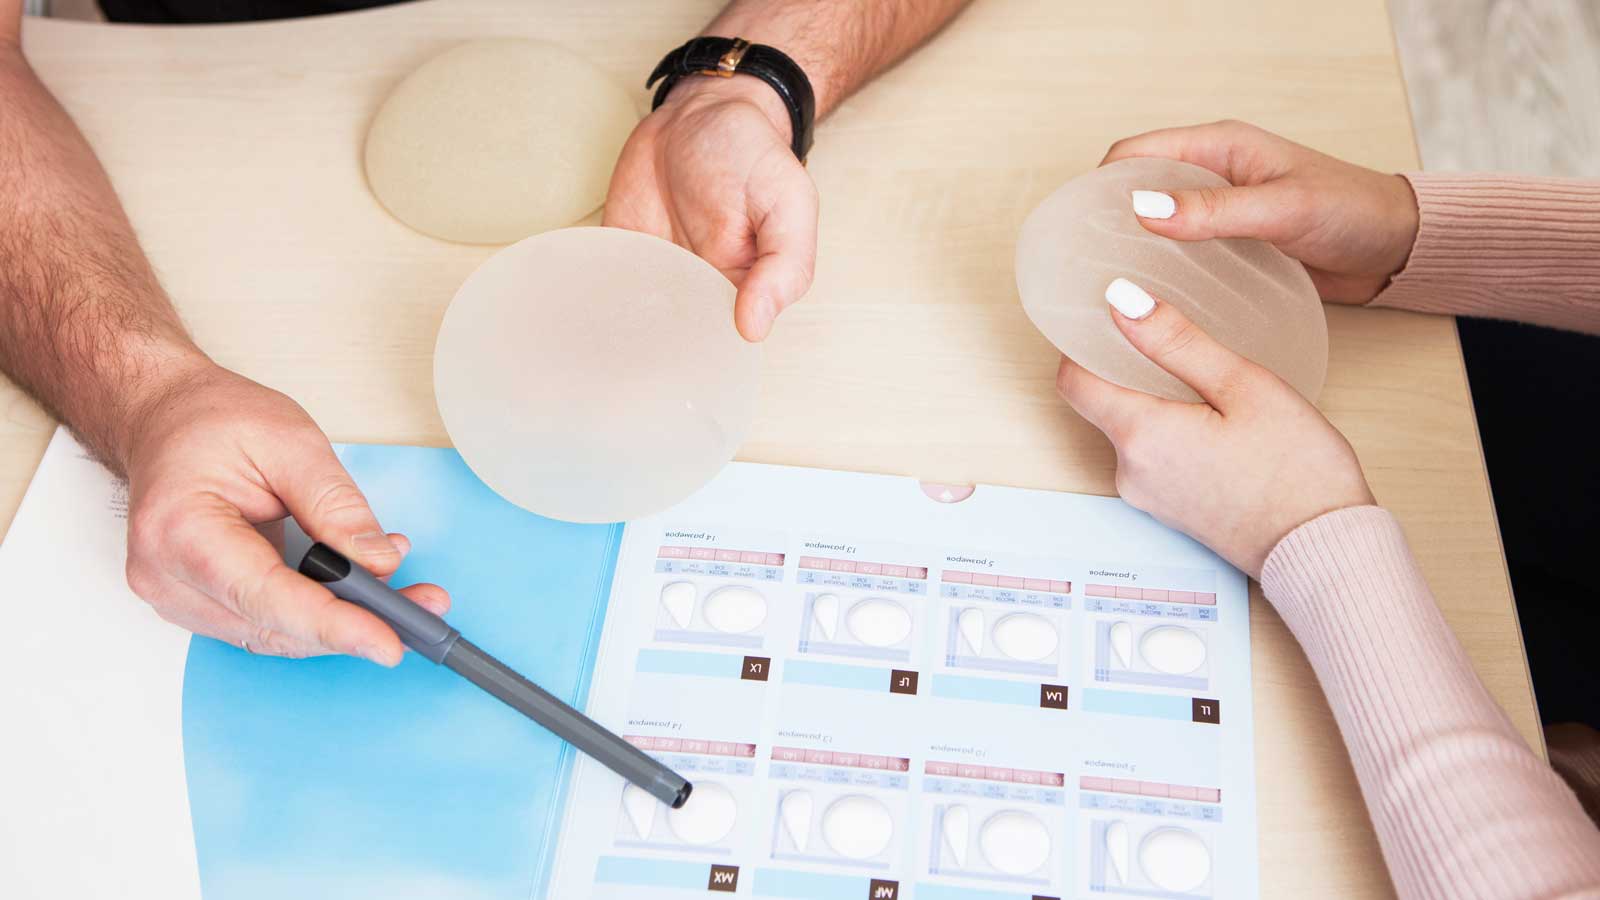 Do Breast Implants Feel Heavier Than Your Natural Breasts?